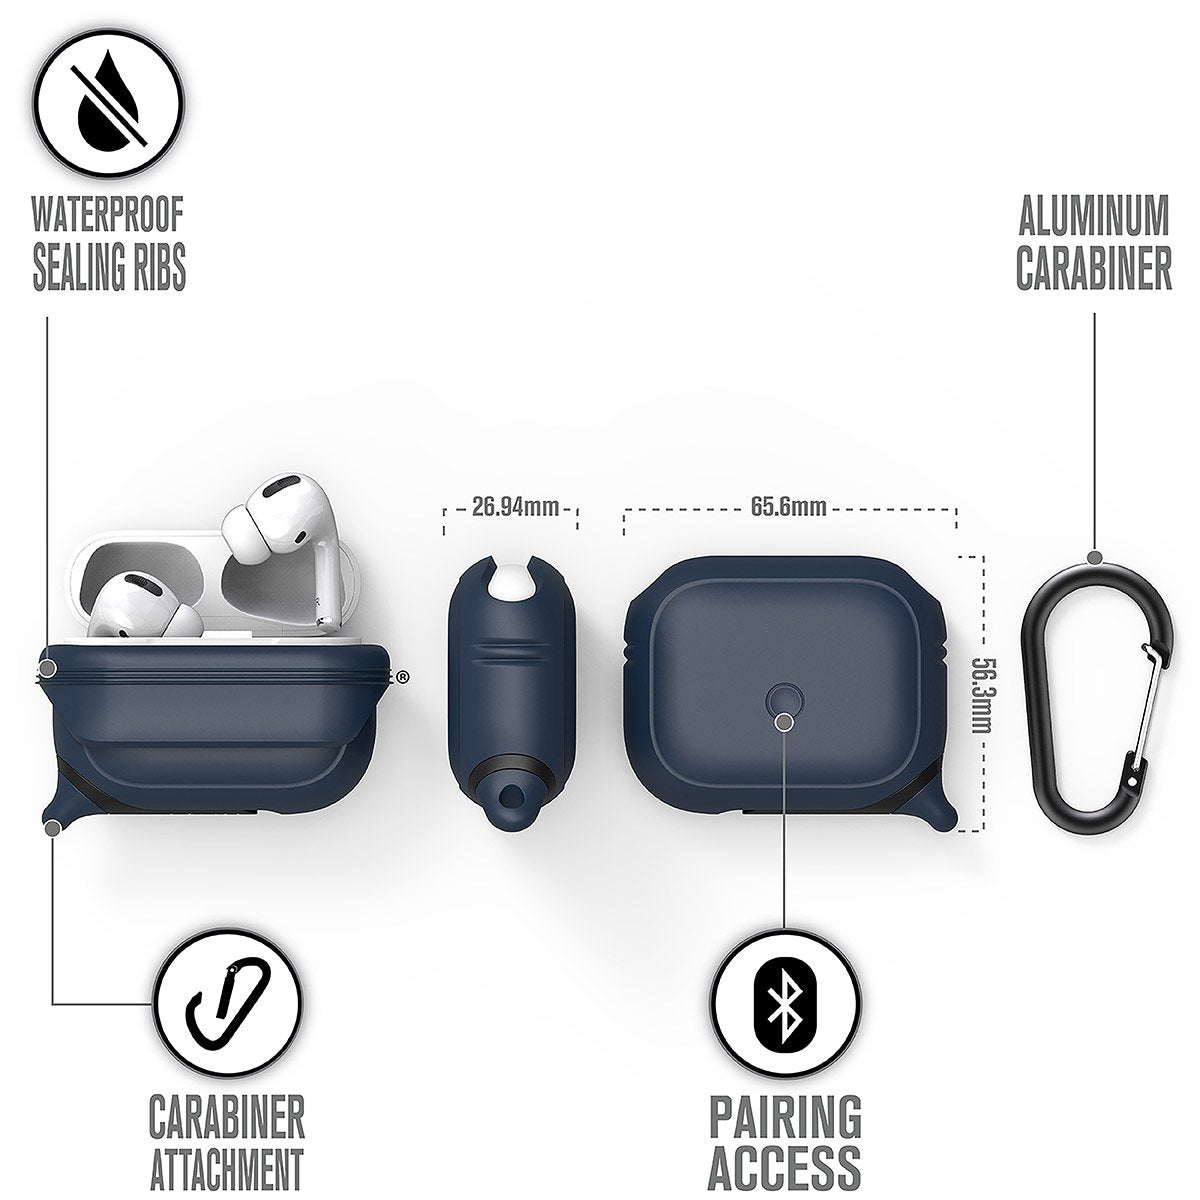 CATAPDPRONAV | catalyst airpods pro gen 2 1 waterproof case carabiner midnight blue different views showing the sealing ribs carabiner attachment loop and pairing access text reads waterproof sealing ribs aluminum carabiner carabiner attachment pairing access